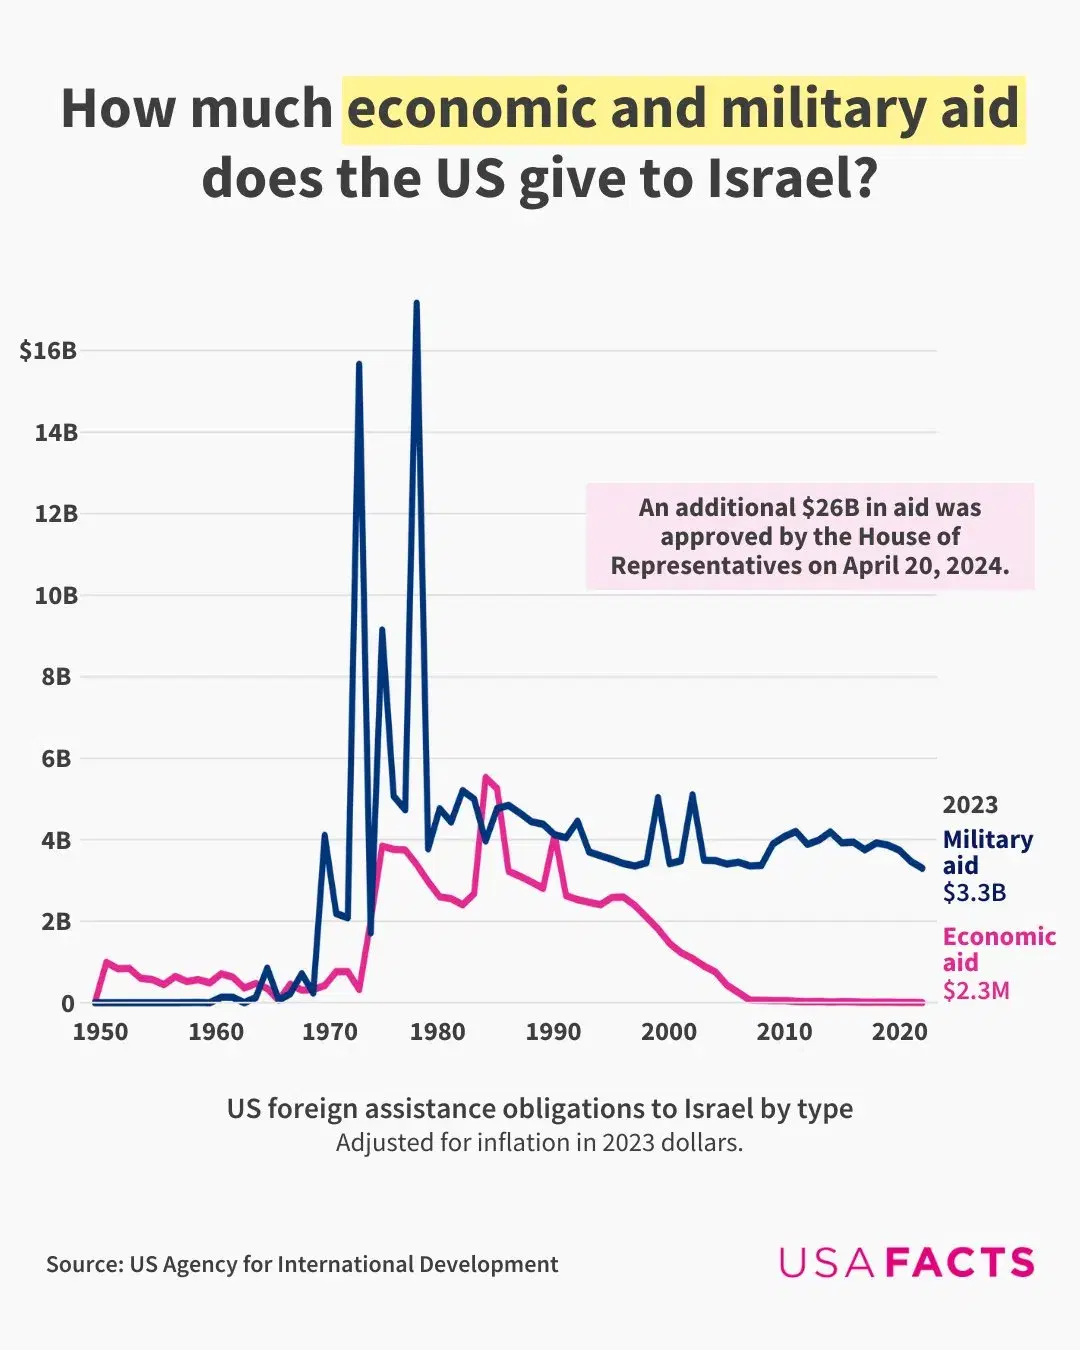 How Much Economic and Military Aid Does the US Give to Israel?